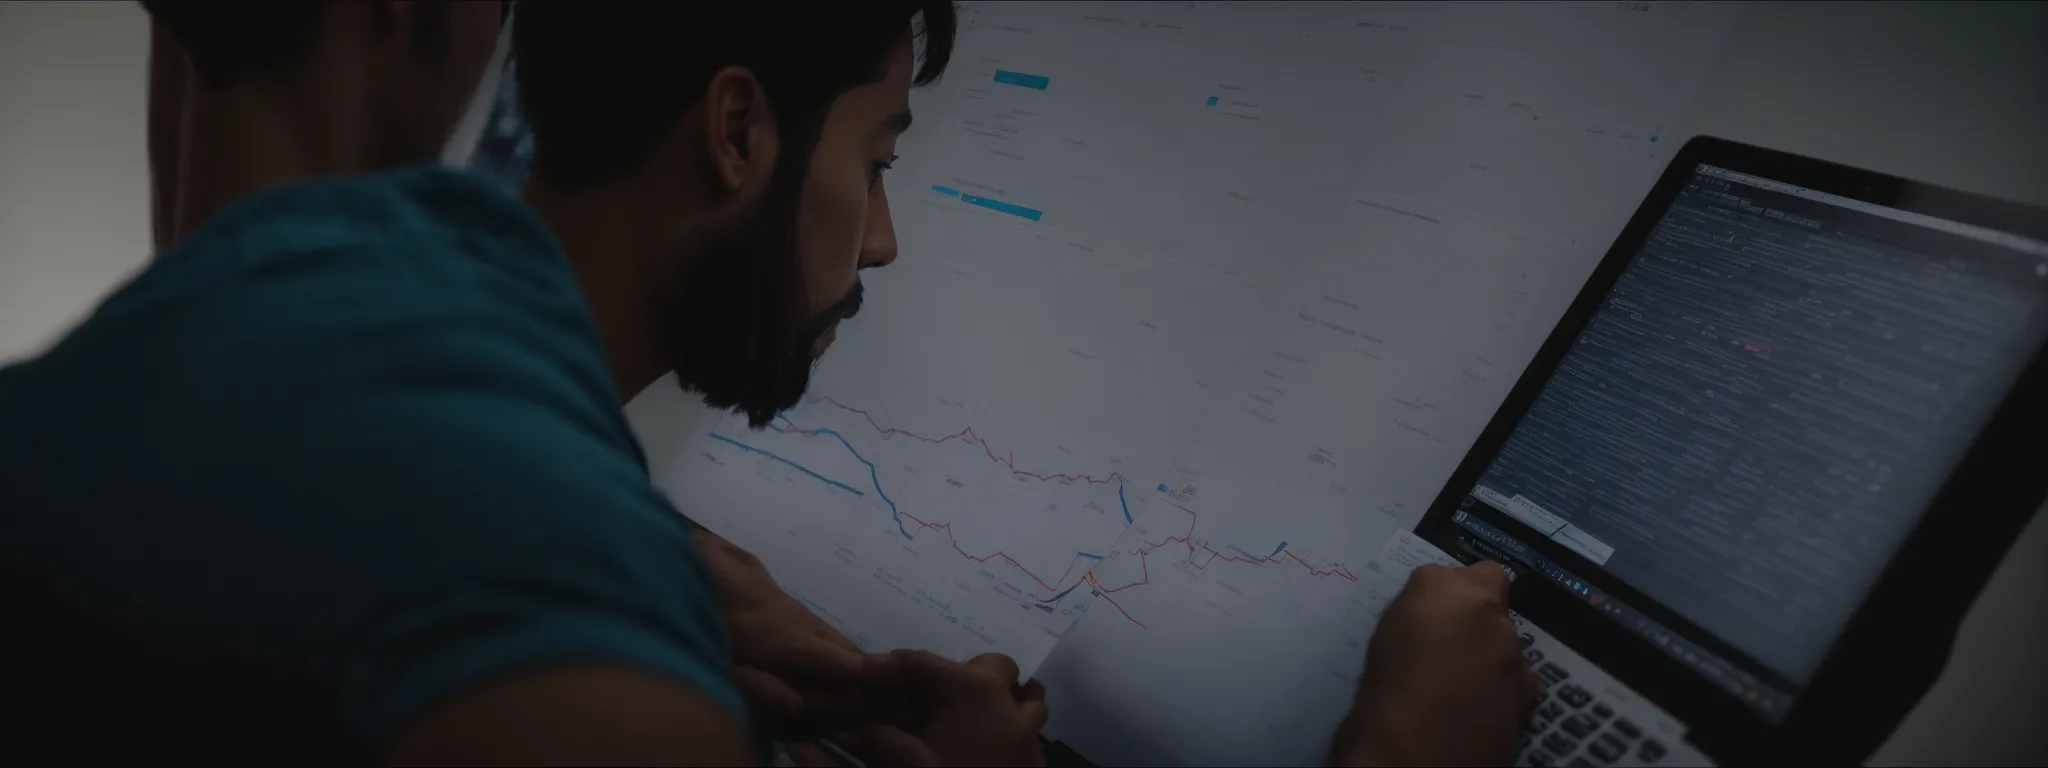 a digital marketing strategist intently examines a graph-laden computer screen, mapping out an seo campaign.